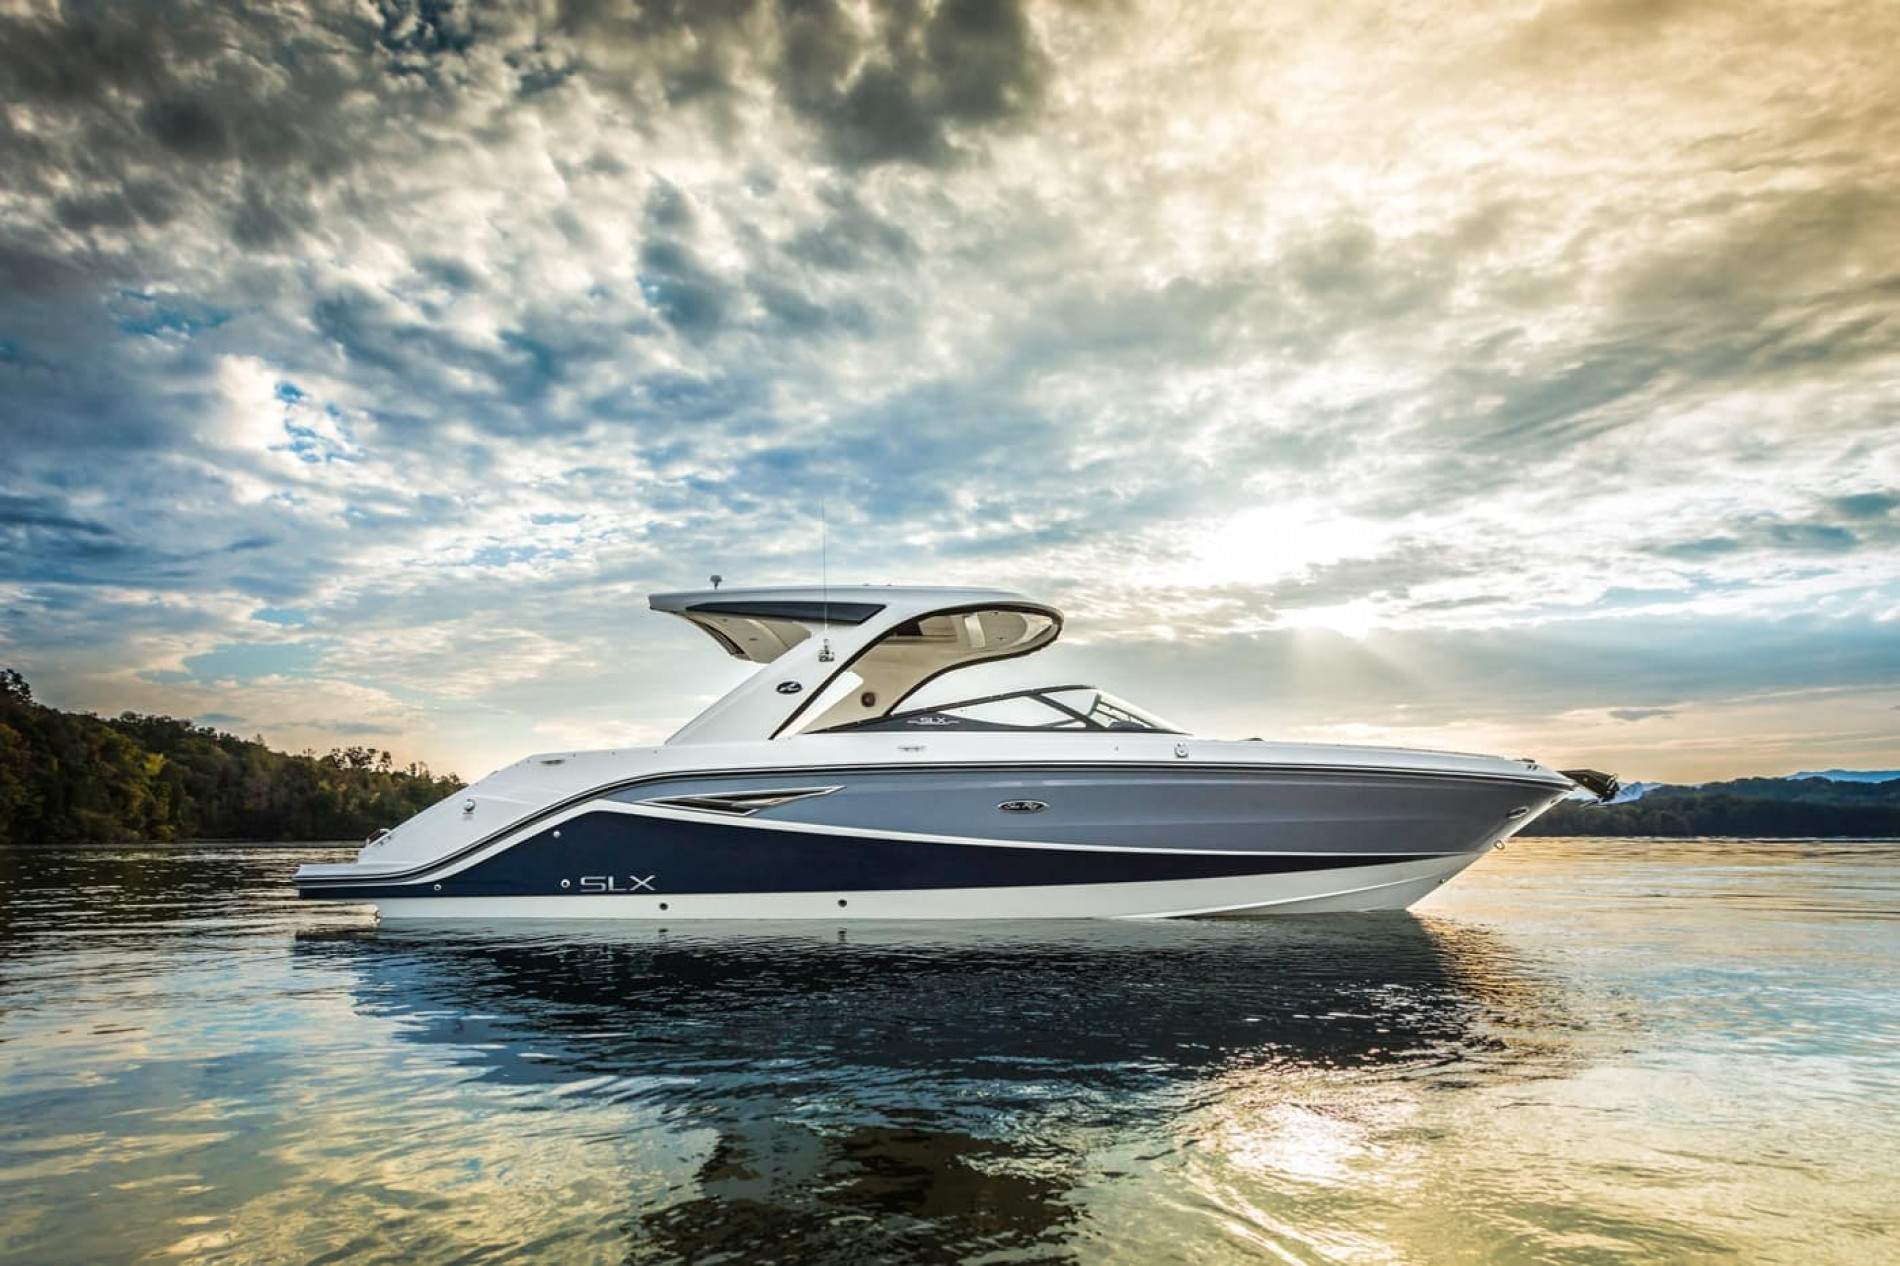 THIS NEW 26-FOOT SPORT BOAT WAS DESIGNED BY YACHTING'S FIRST ALL